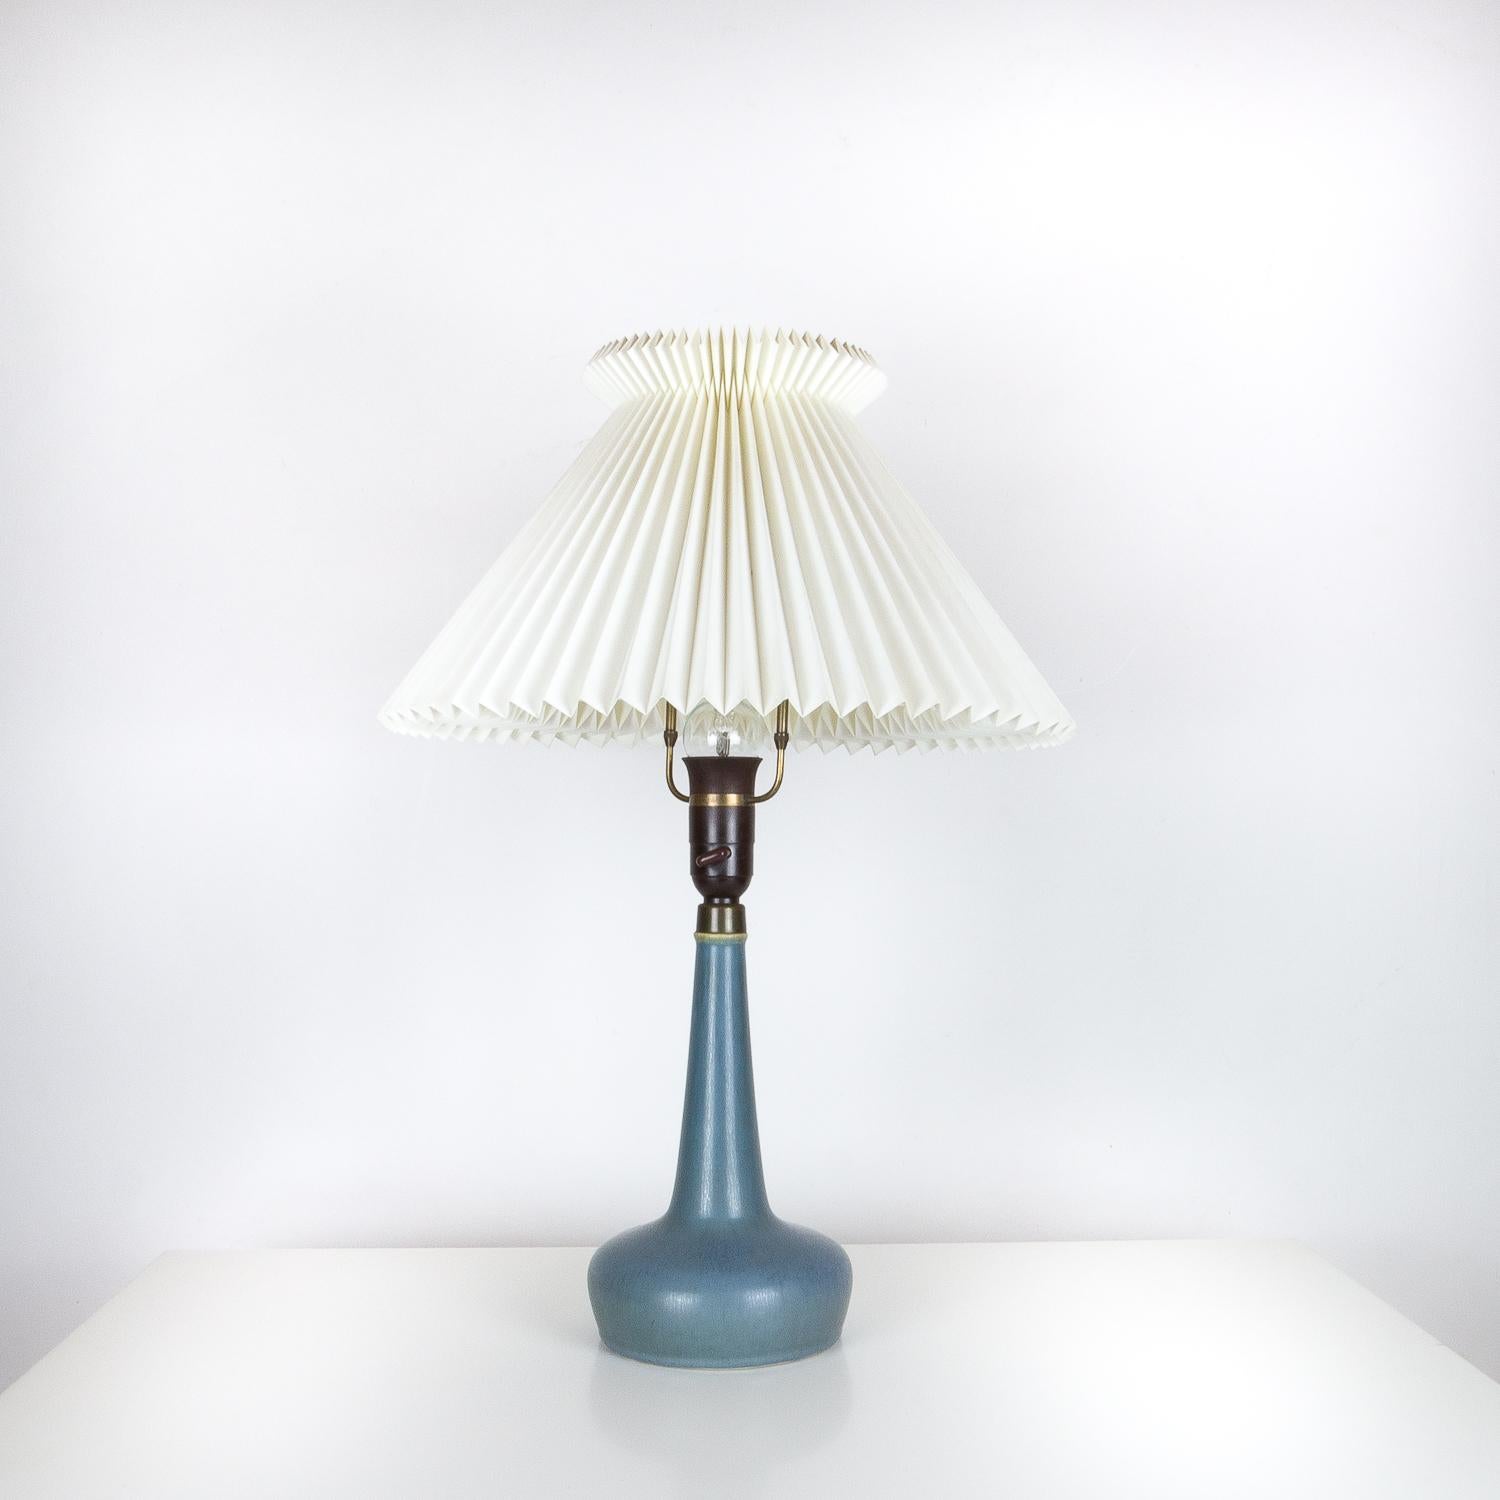 Hand-Crafted Very Rare Model 311 Table Lamp by Esben Klint & Palshus for Le Klint, Denmark